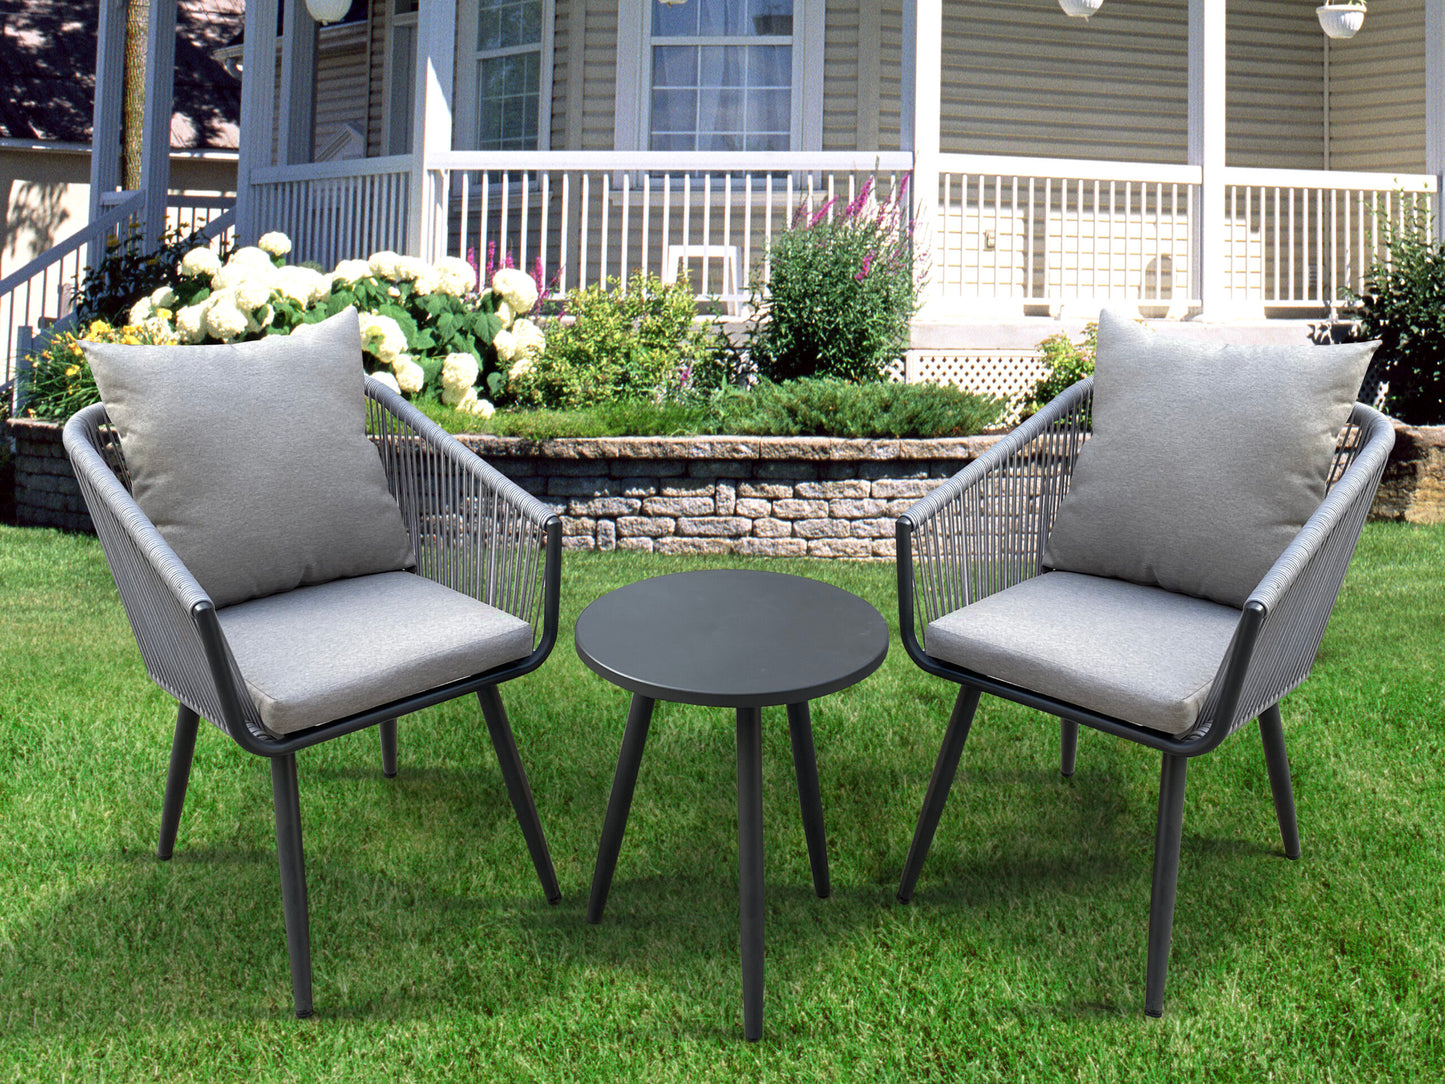 Nicole Miller Patio 3 Piece Outdoor Rope Chat Set with Cushions